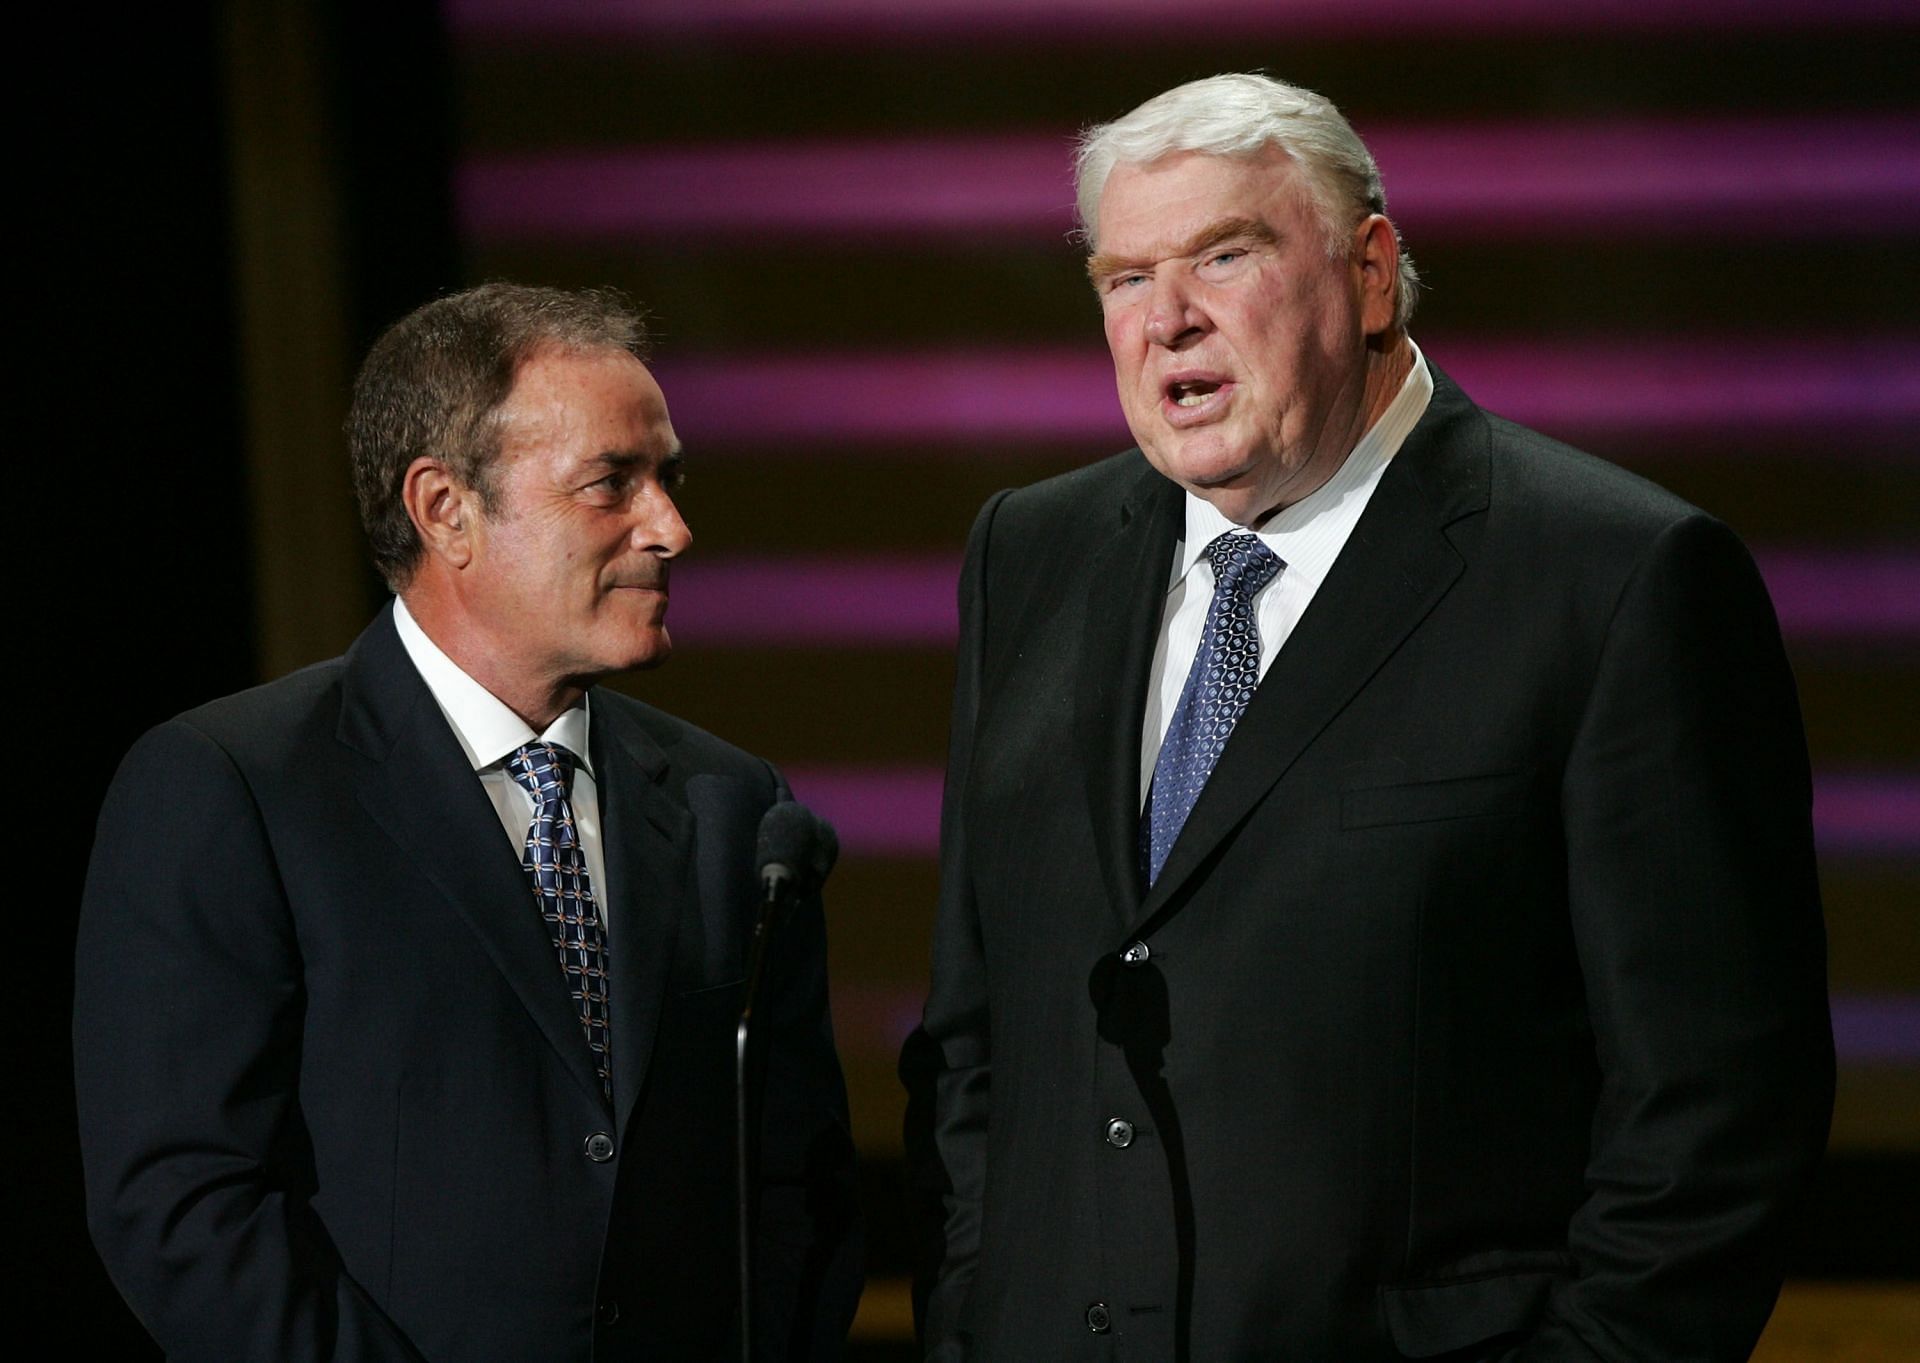 Al Michaels and John Madden at the 12th Annual ESPY Awards - Show